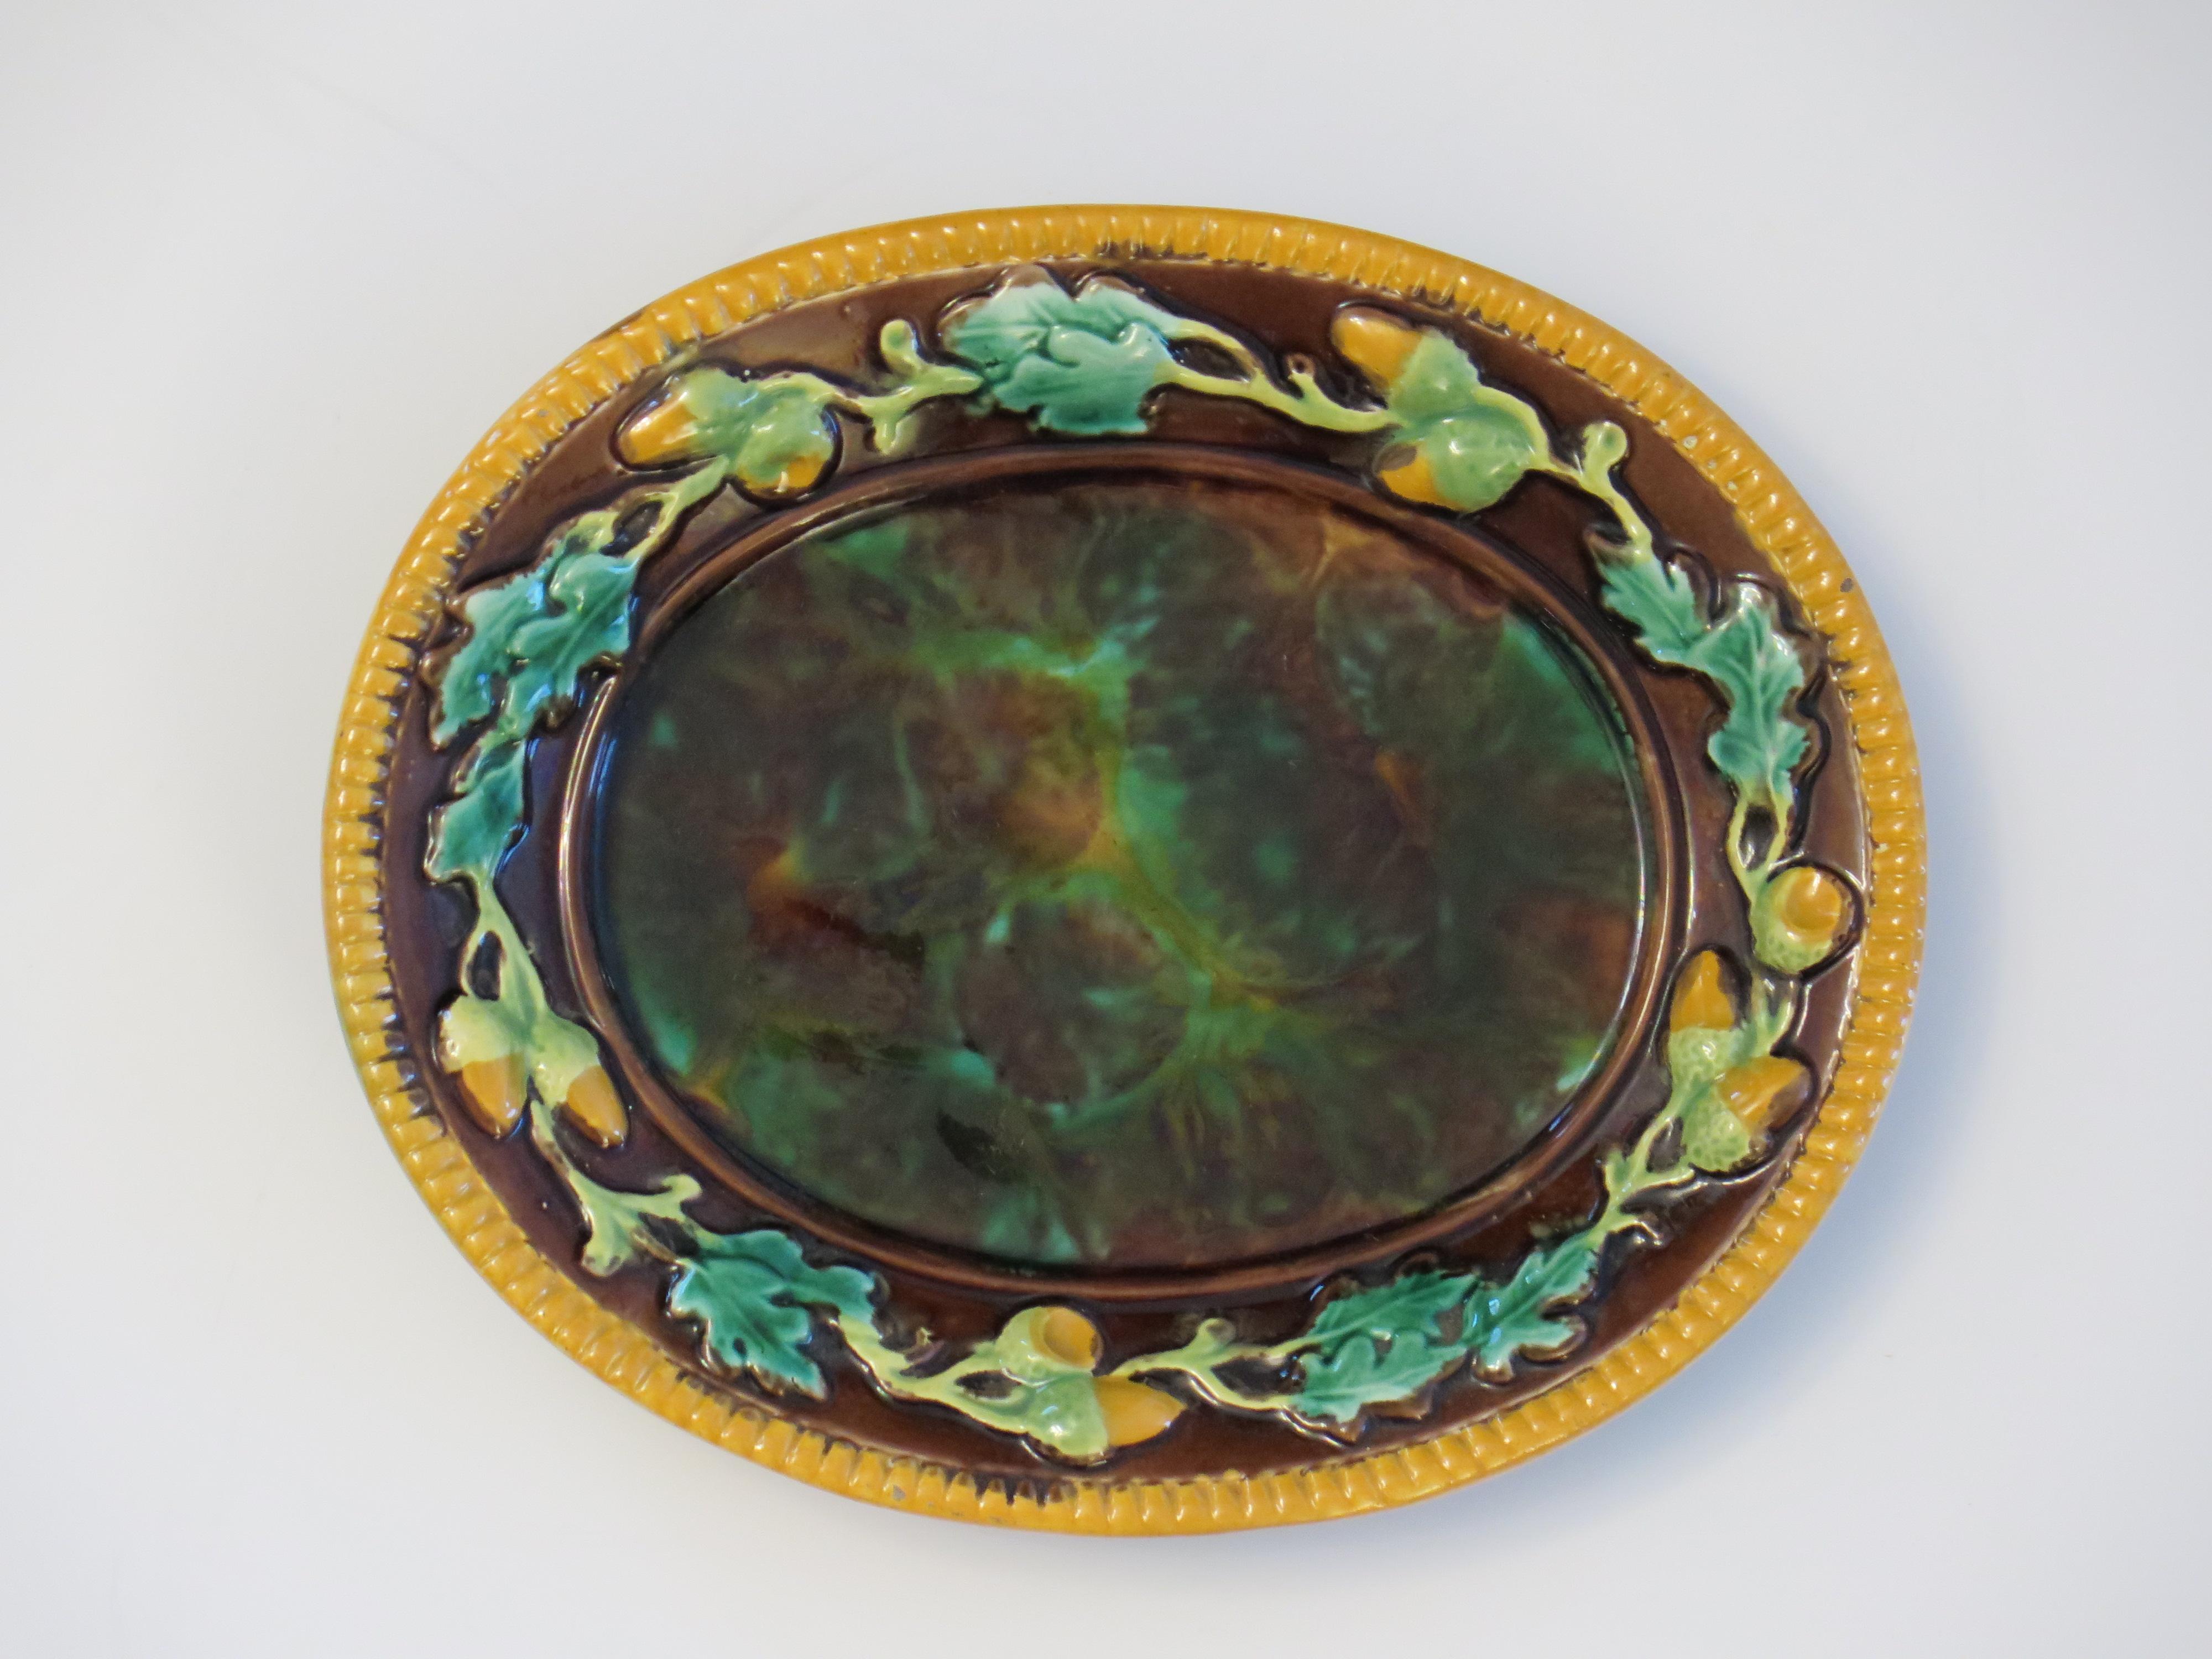 This is a 19th Century Majolica oval dish or small platter by George Jones, fully marked and dating to the Victorian English period 1861 to 1878.

This is a small oval majolica dish on a raised foot, by George Jones and is a very good example of its